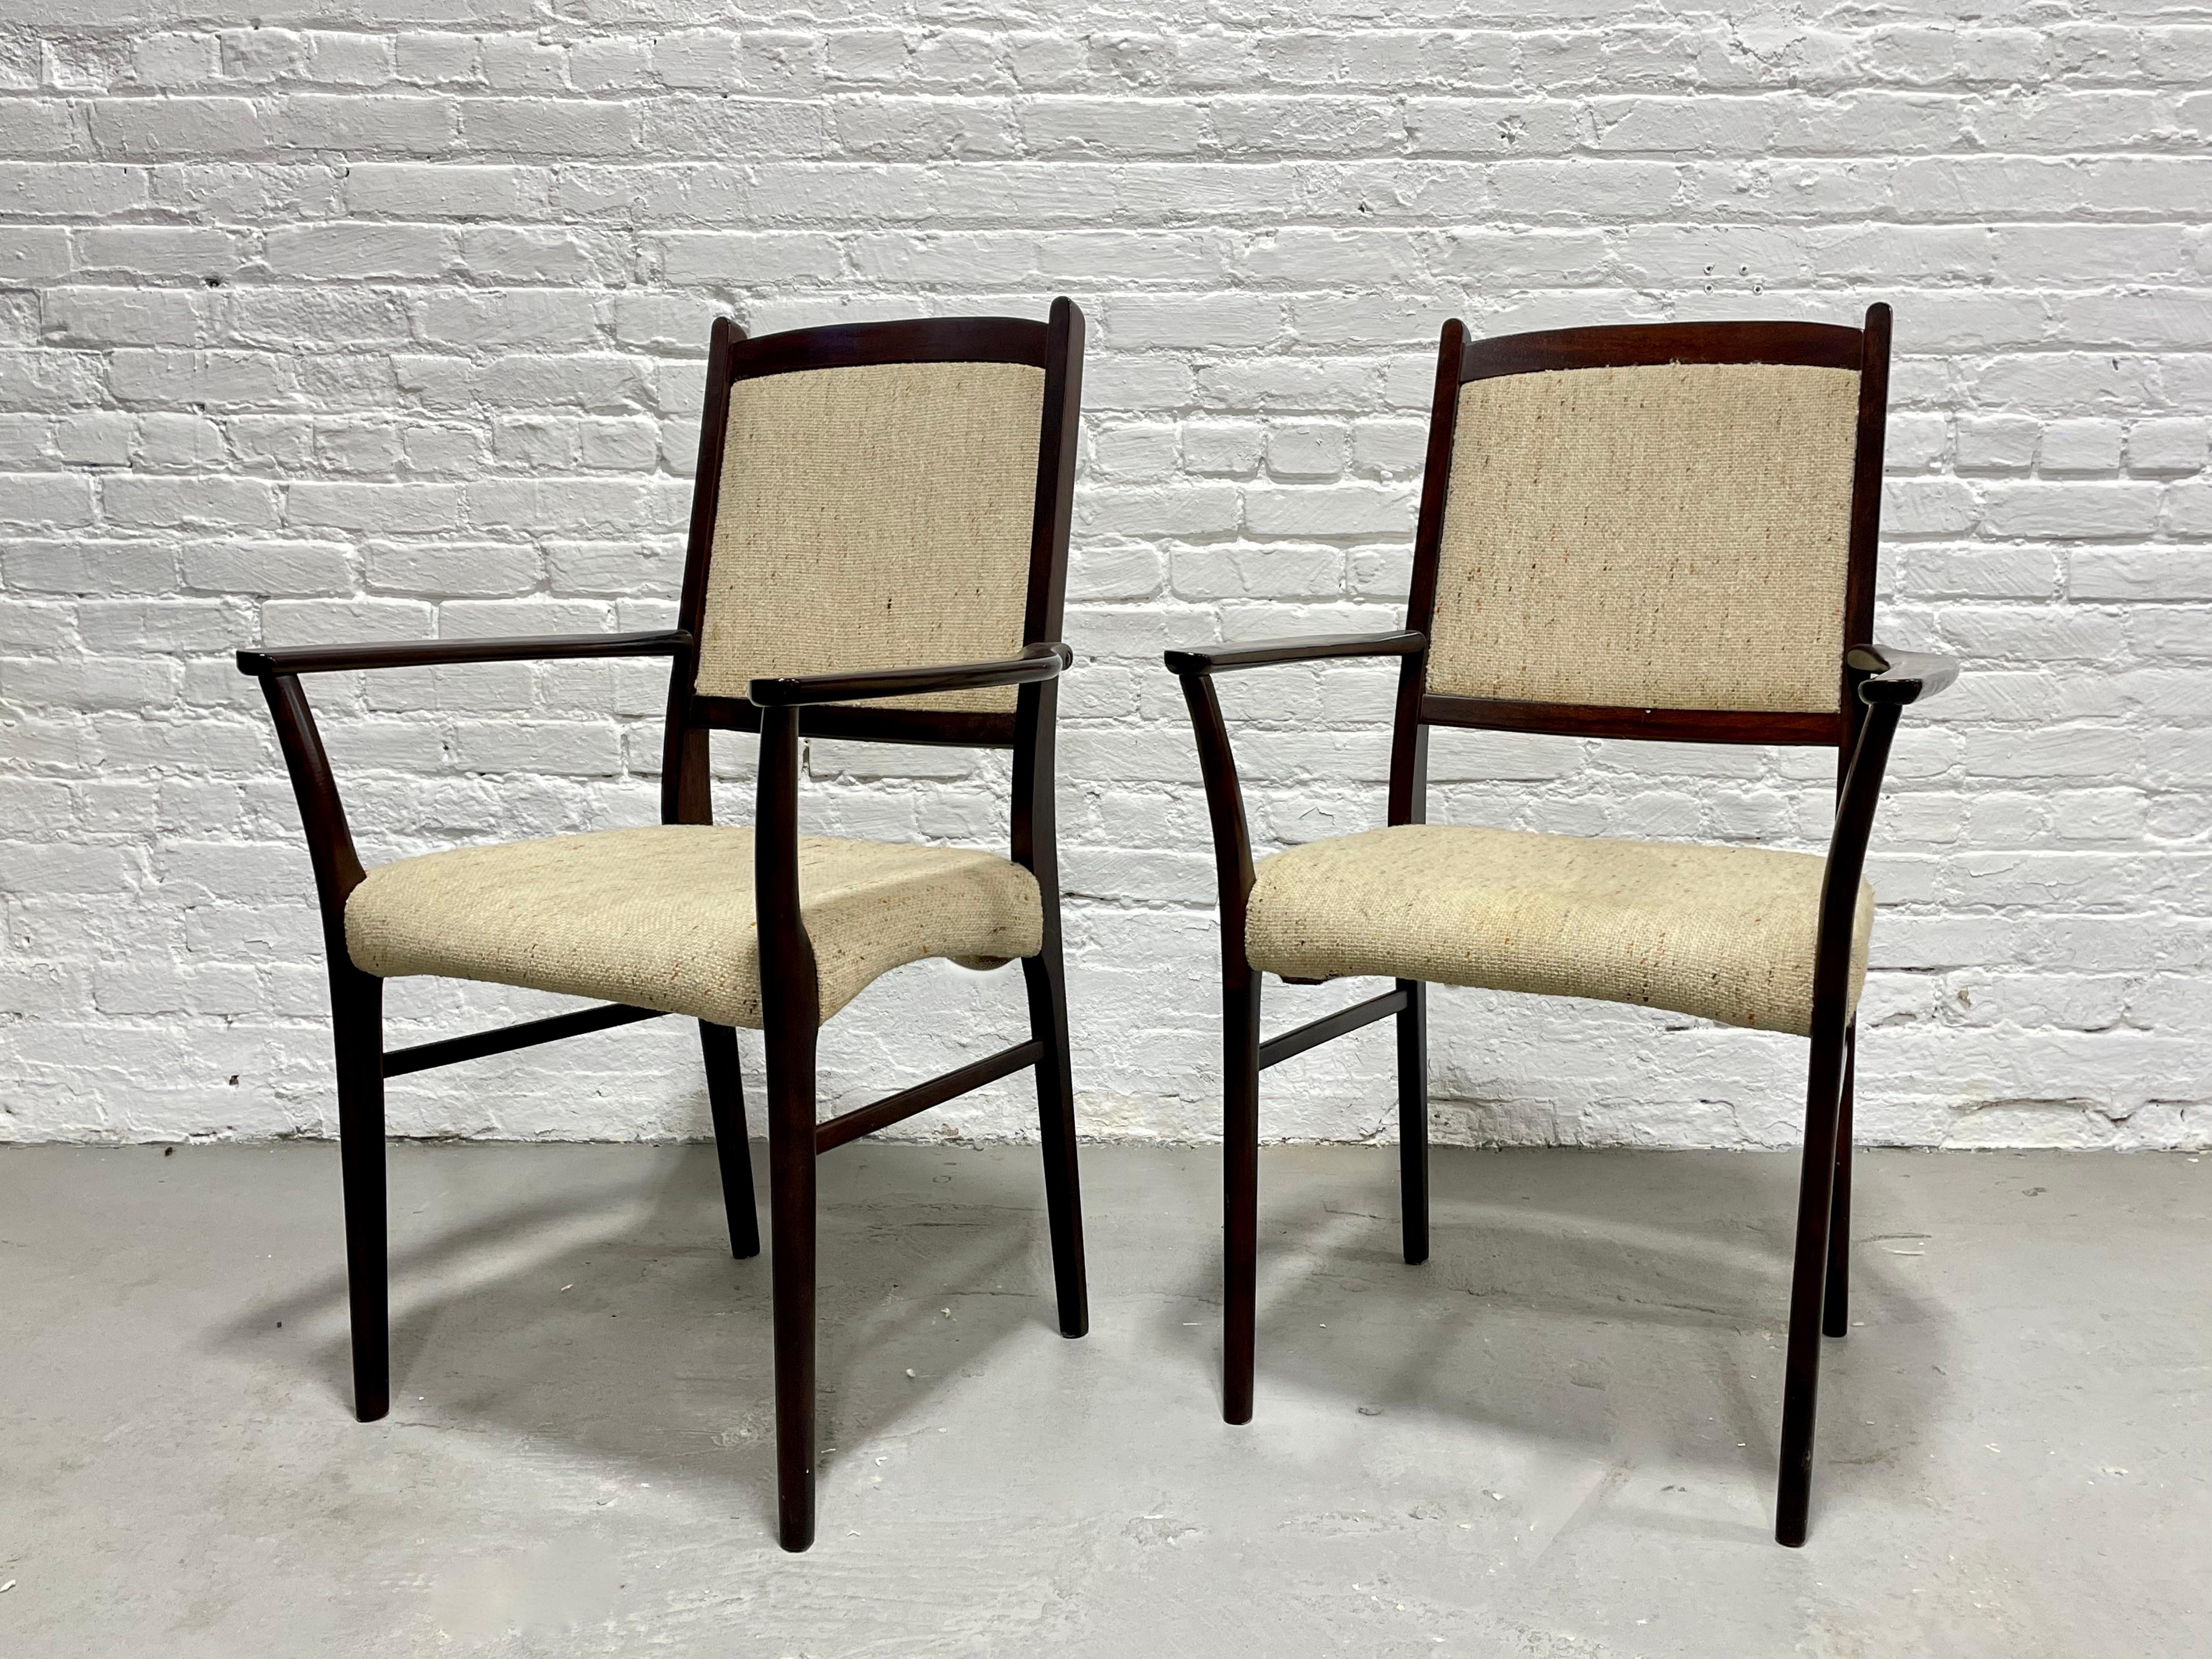 Danish Mid Century Modern ROSEWOOD DINING CHAIRS, a Pair In Good Condition For Sale In Weehawken, NJ